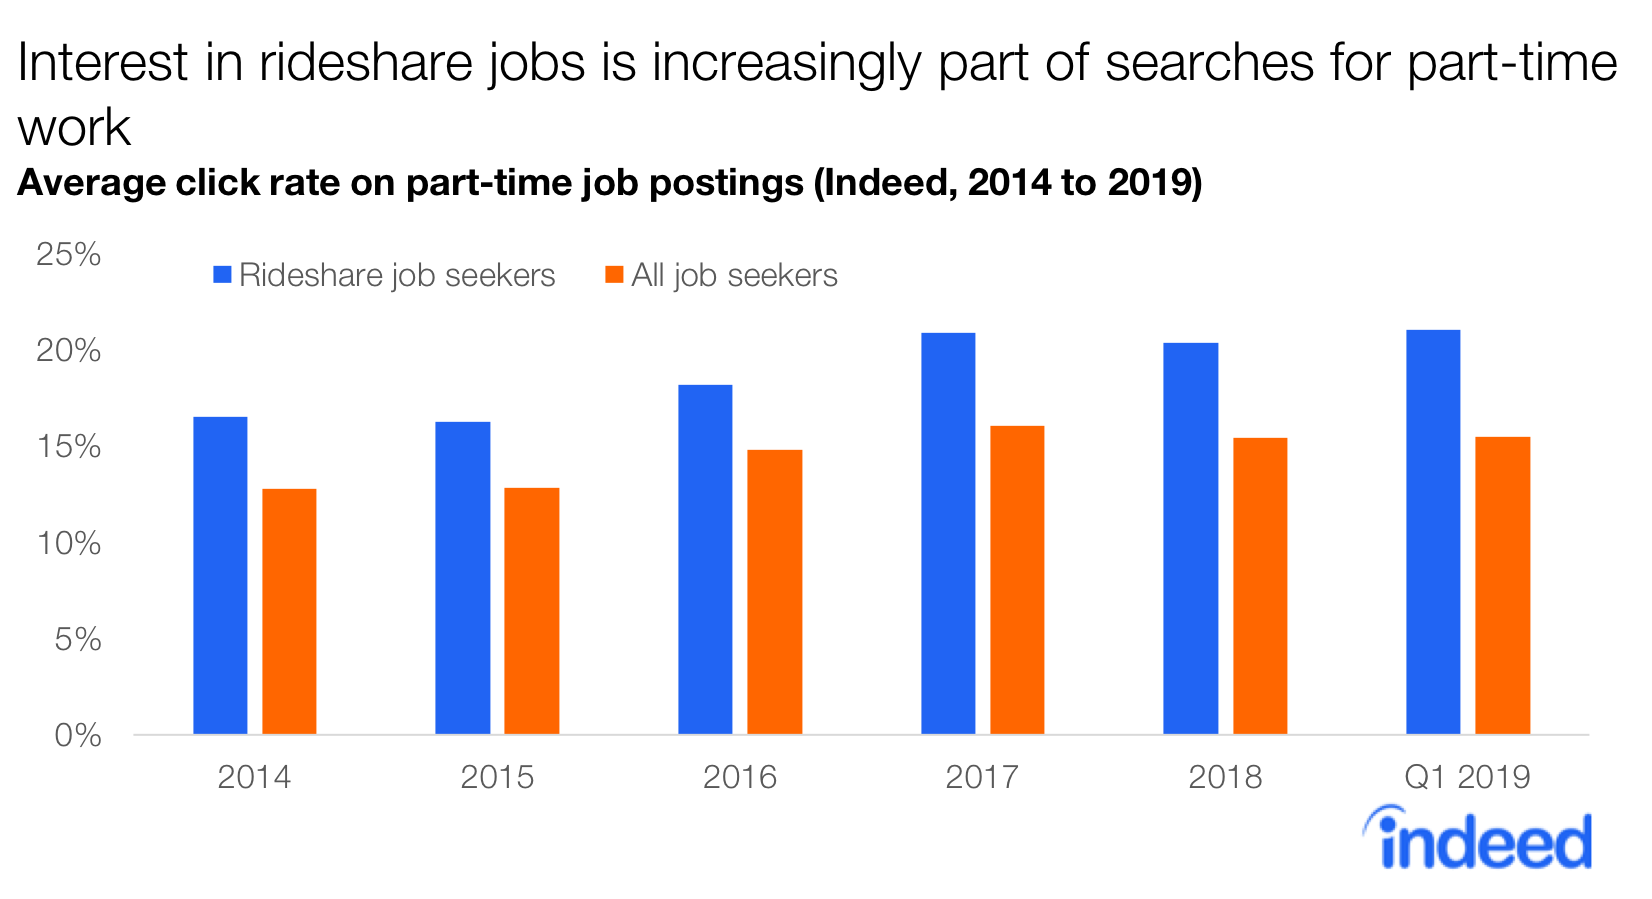 Bar chart shows that interest in rideshare jobs is increasingly part of searches for part-time work.